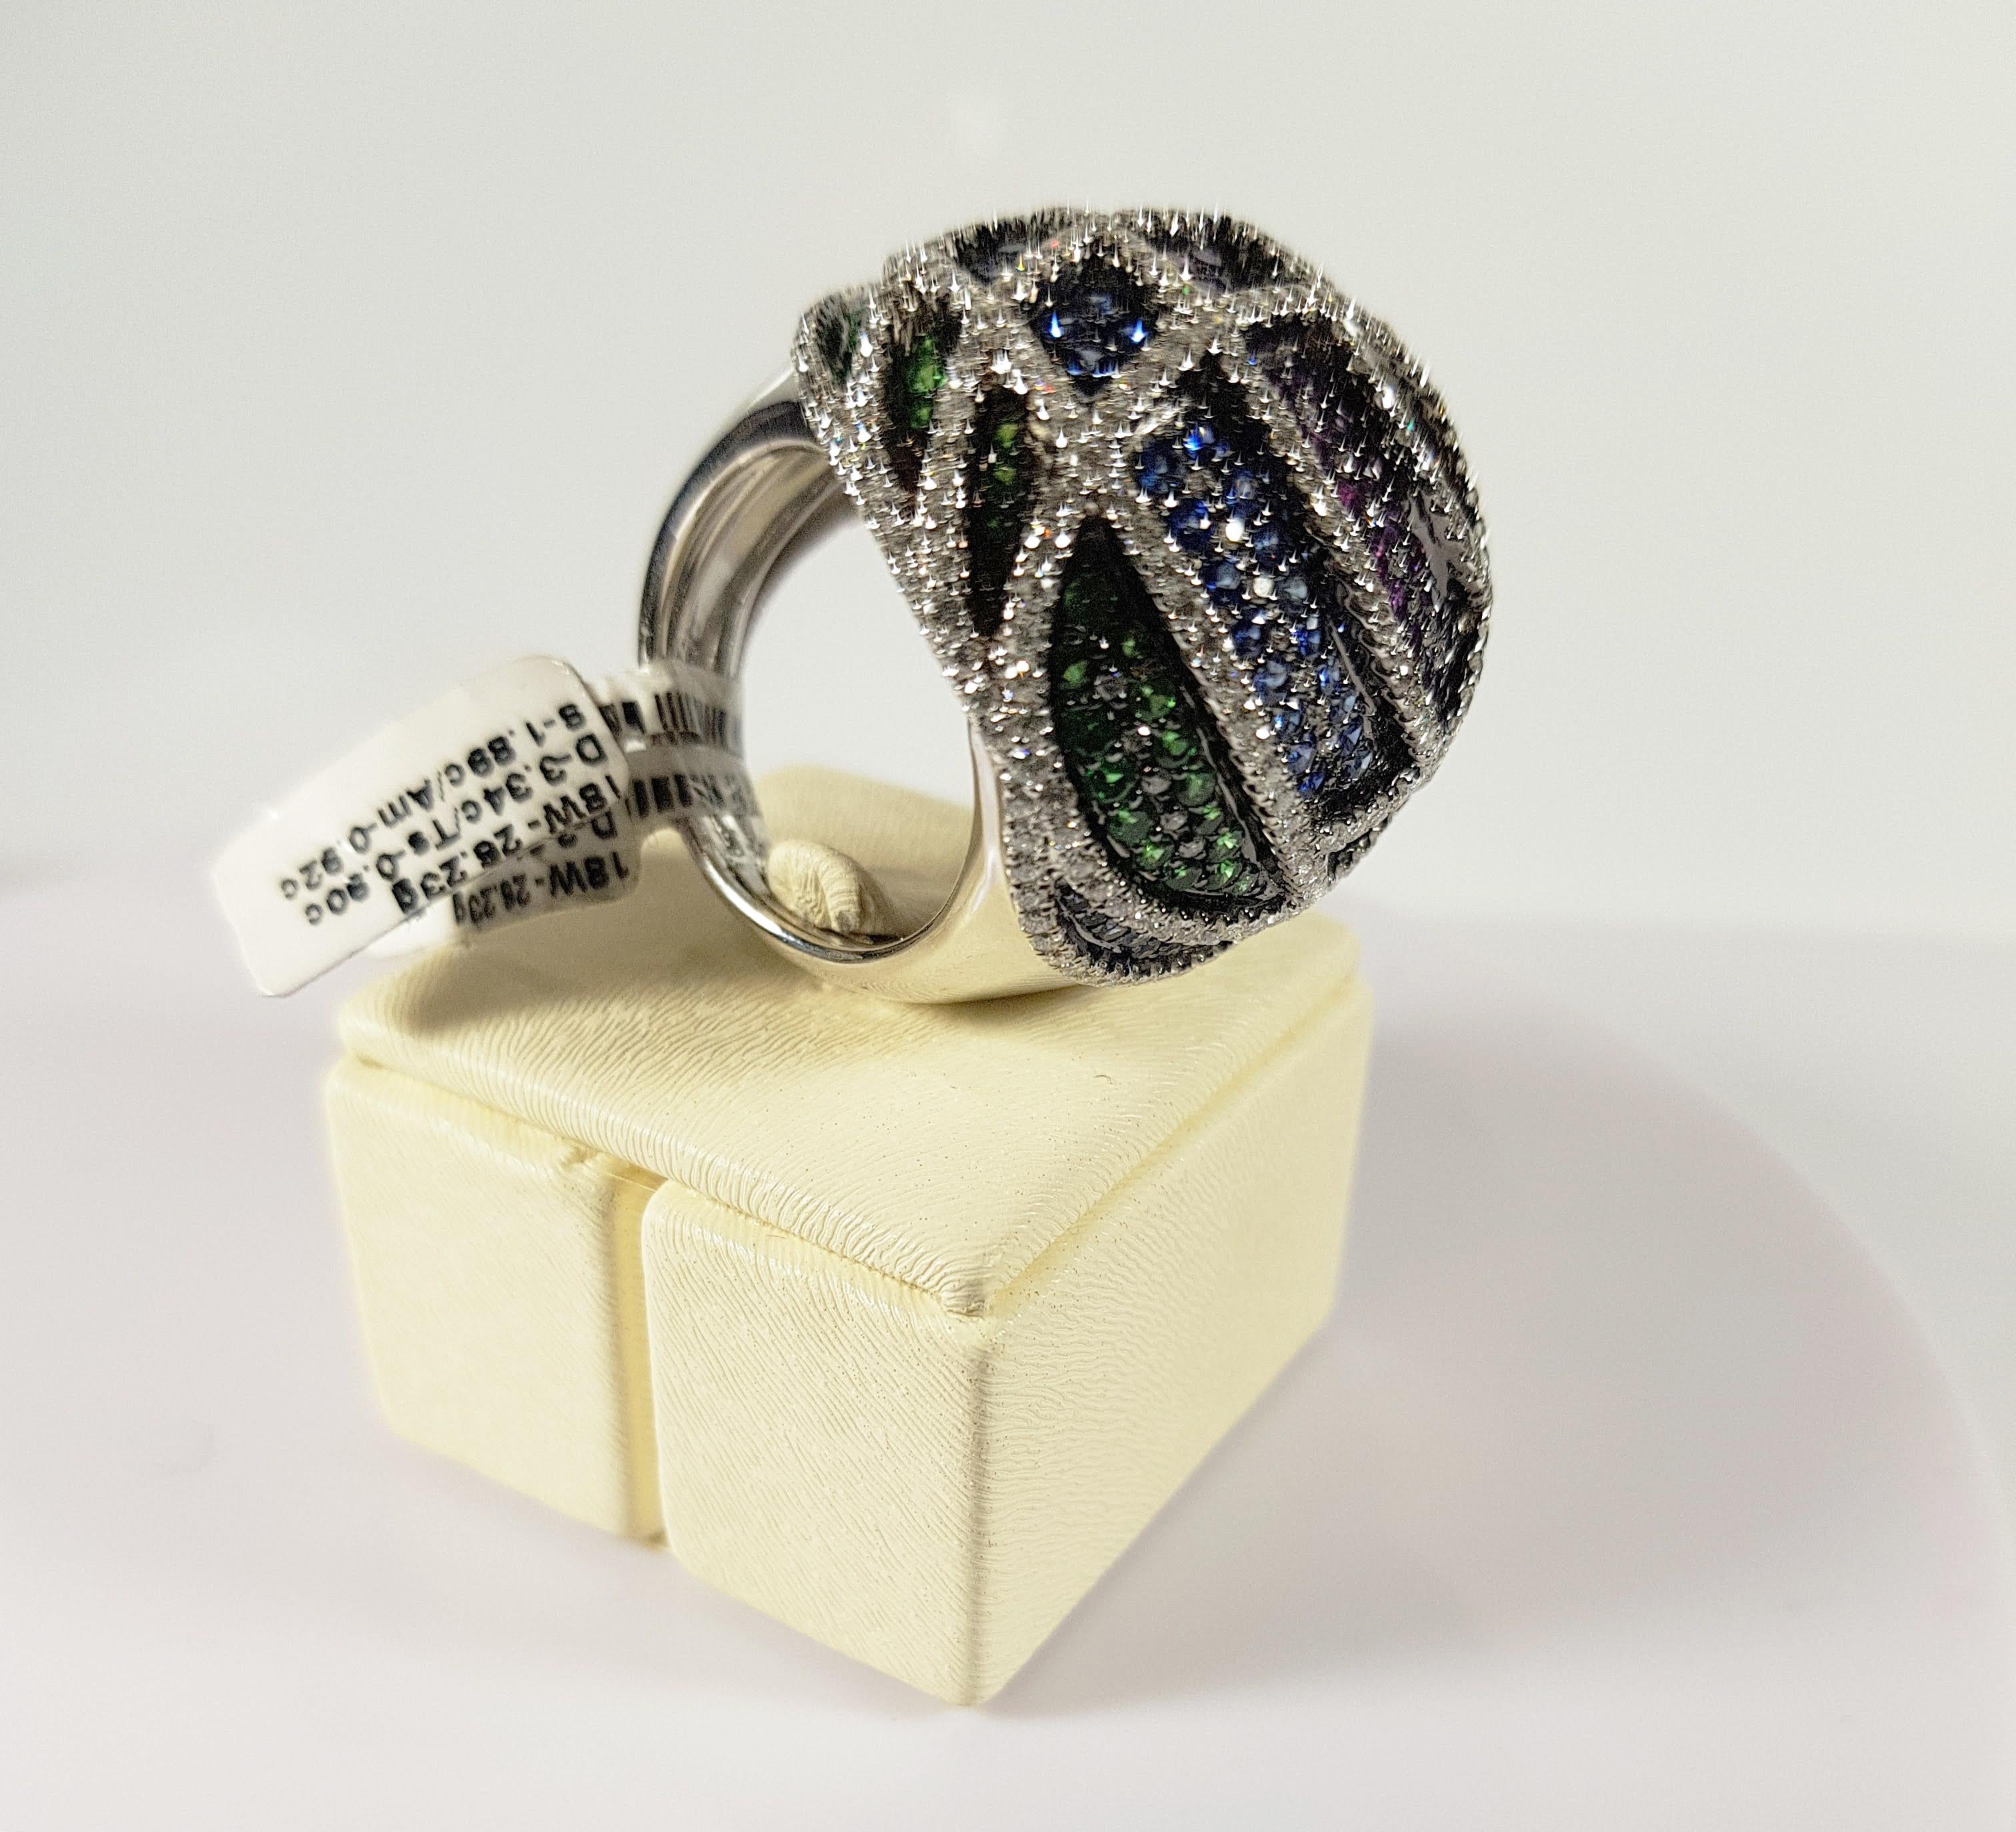 Brilliant Cut 18 Karat White Gold Ring with Diamonds, Amathyste, Sapphires and Tsavorite For Sale